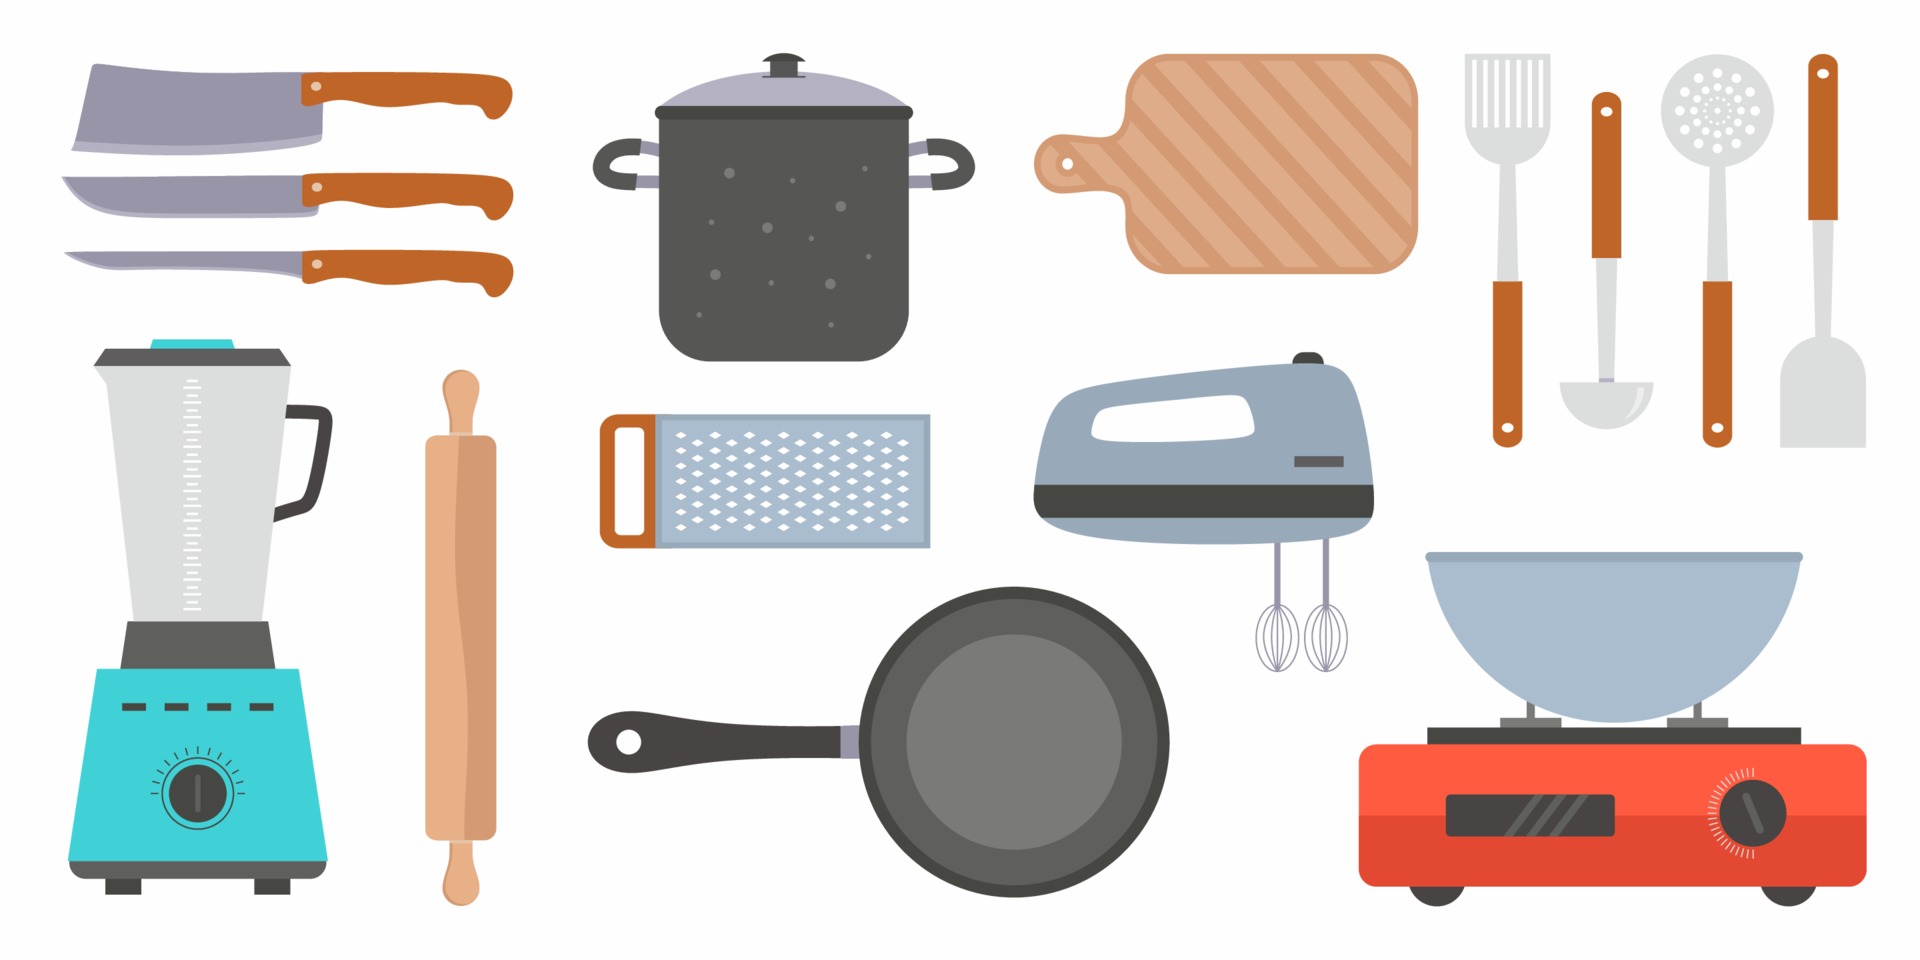 https://static.vecteezy.com/system/resources/previews/002/098/858/original/kitchen-utensil-design-elements-set-cooking-and-kitchenware-modern-tools-collection-isolated-on-white-background-trendy-textures-on-cartoon-kitchen-items-kitchen-appliance-decorative-colorful-vector.jpg